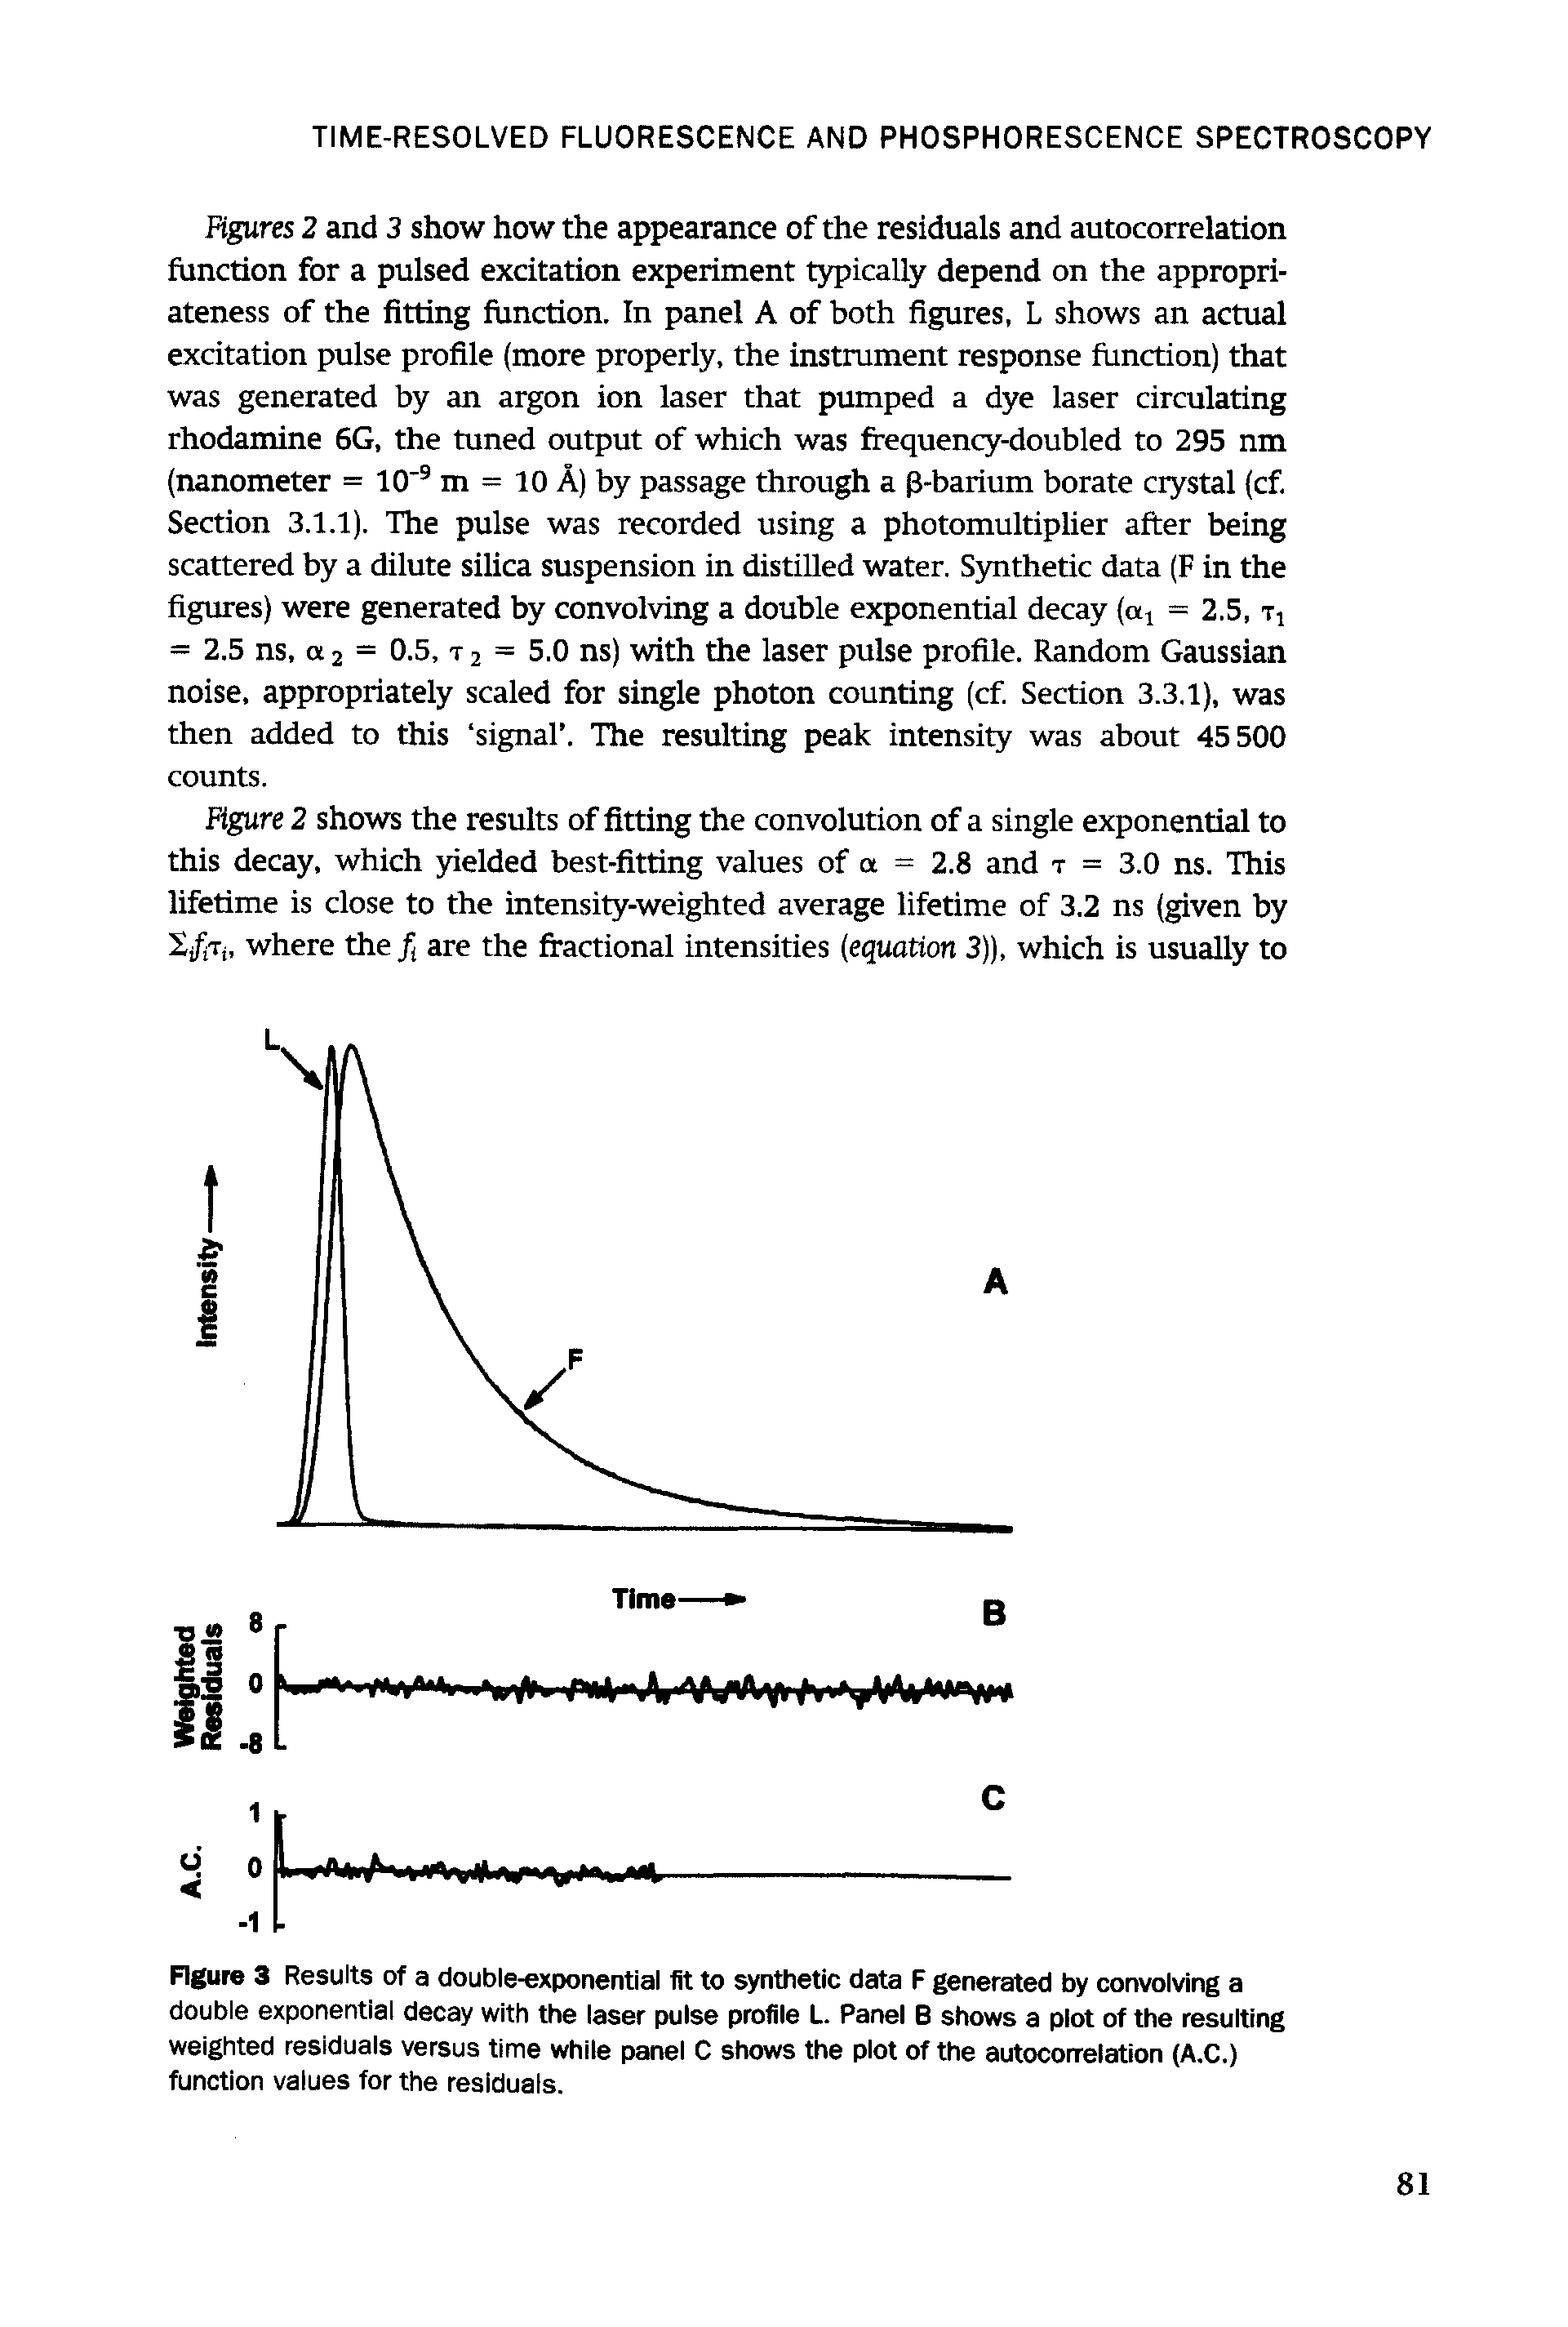 Figures 2 and 3 show how the appearance of the residuals and autocorrelation function for a pulsed excitation experiment typically depend on the appropriateness of the fitting function. In panel A of both figures, L shows an actual excitation pulse profile (more properly, the instrument response function) that was generated by an argon ion laser that pumped a dye laser circulating rhodamine 6G, the tuned output of which was frequency-doubled to 295 nm (nanometer = 10" m = 10 A) by passage through a p-barium borate crystal (cf.